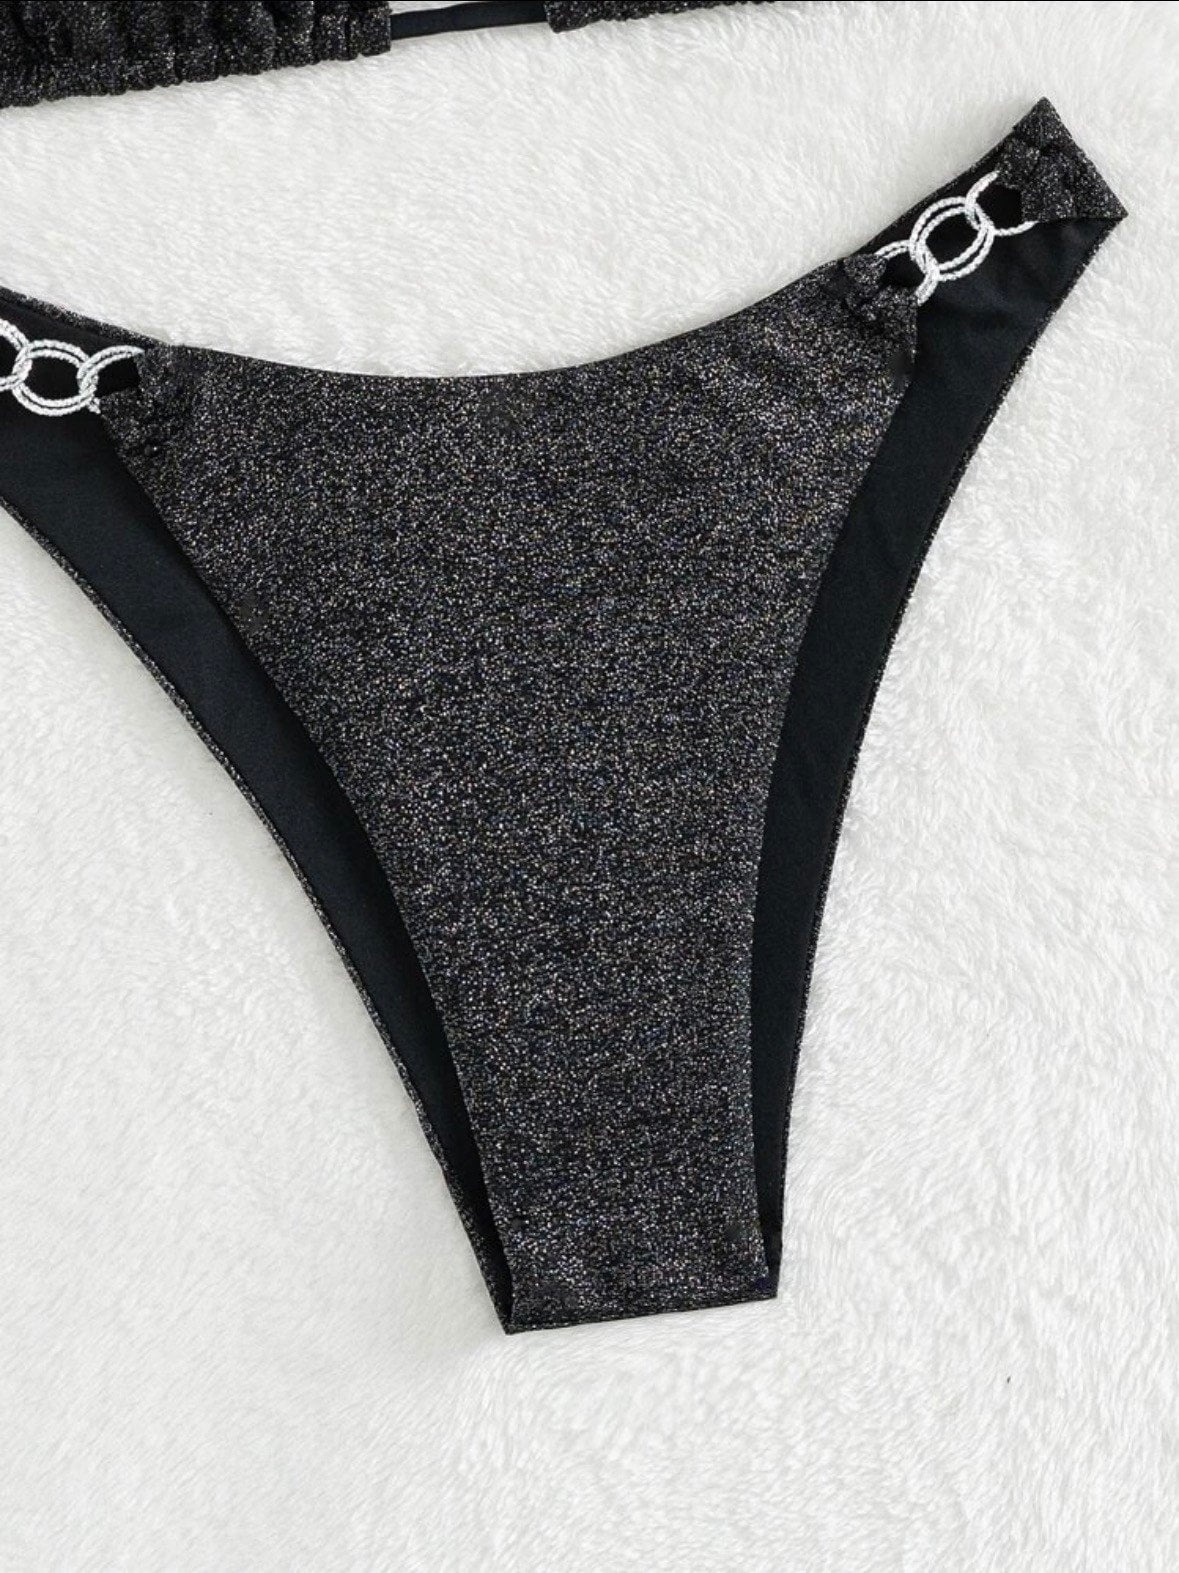 The Metallic black sparkle print swim bikini with chain link sides silver black triangle tie and bottoms light weight sparkly swimsuit set